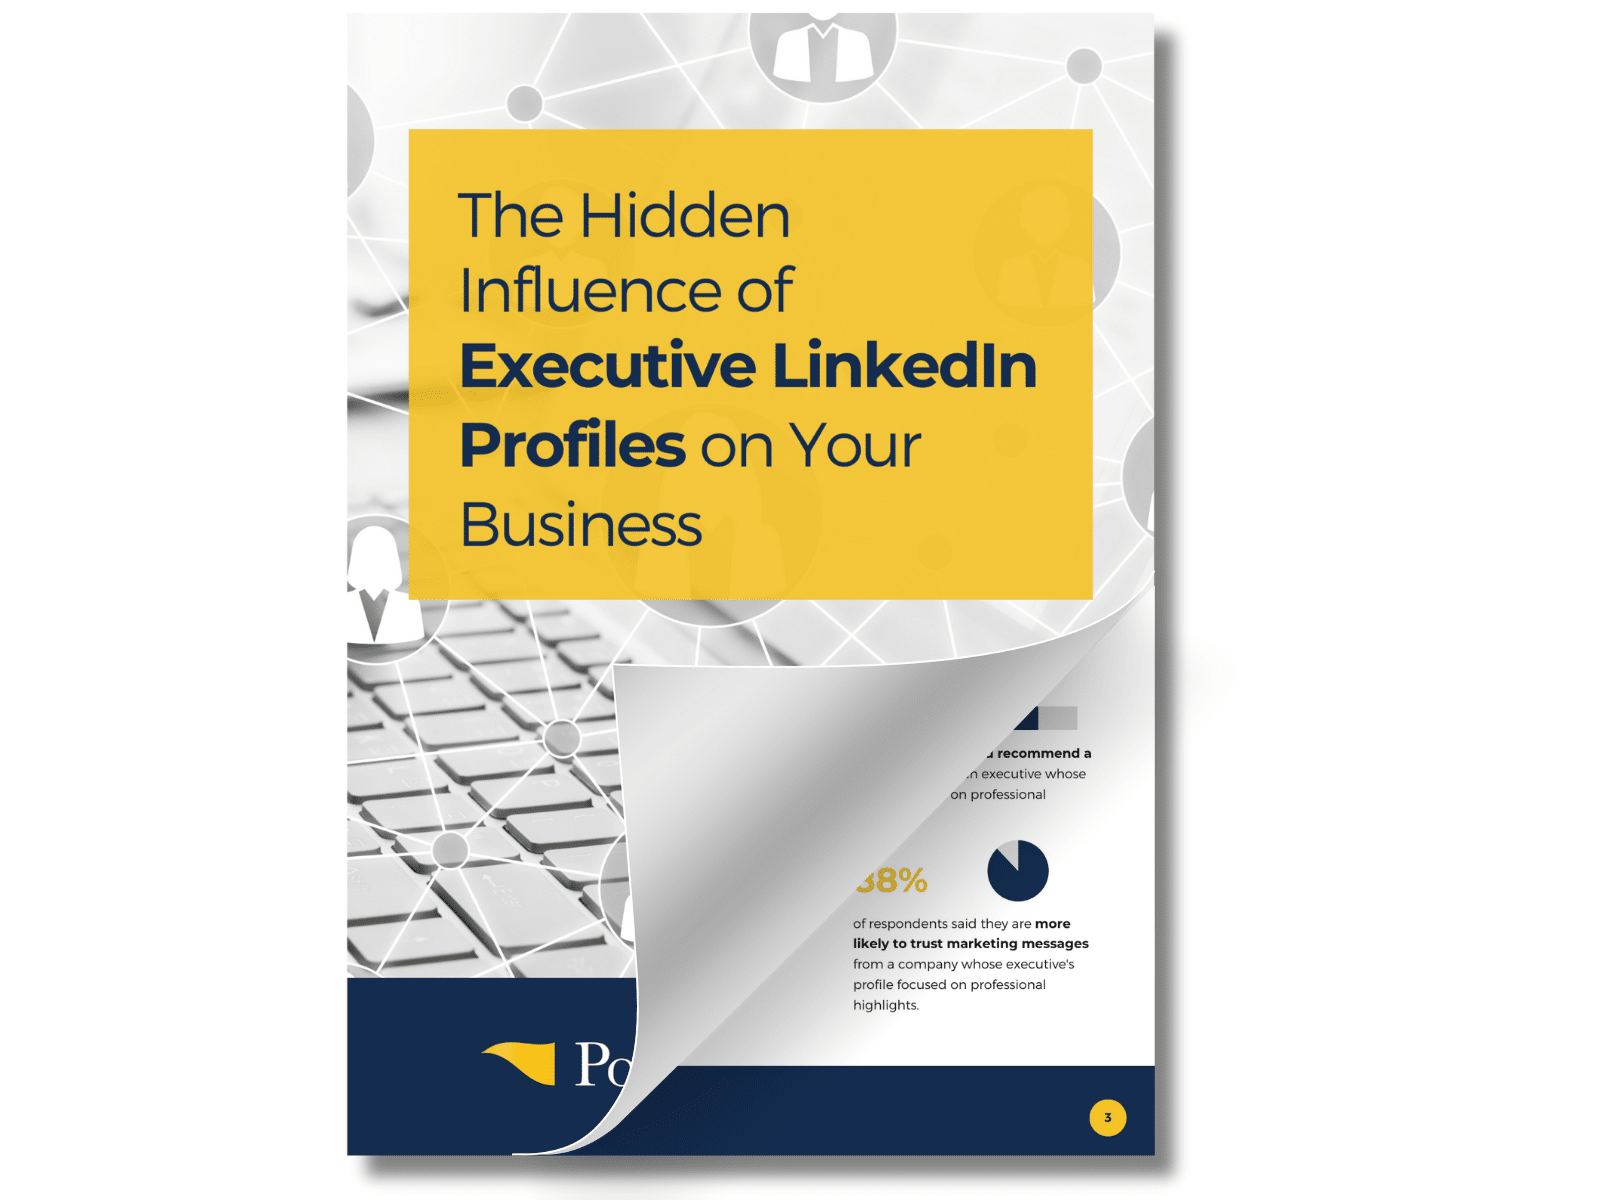 The Hidden Influence of Executive LinkedIn Profiles on Your Business